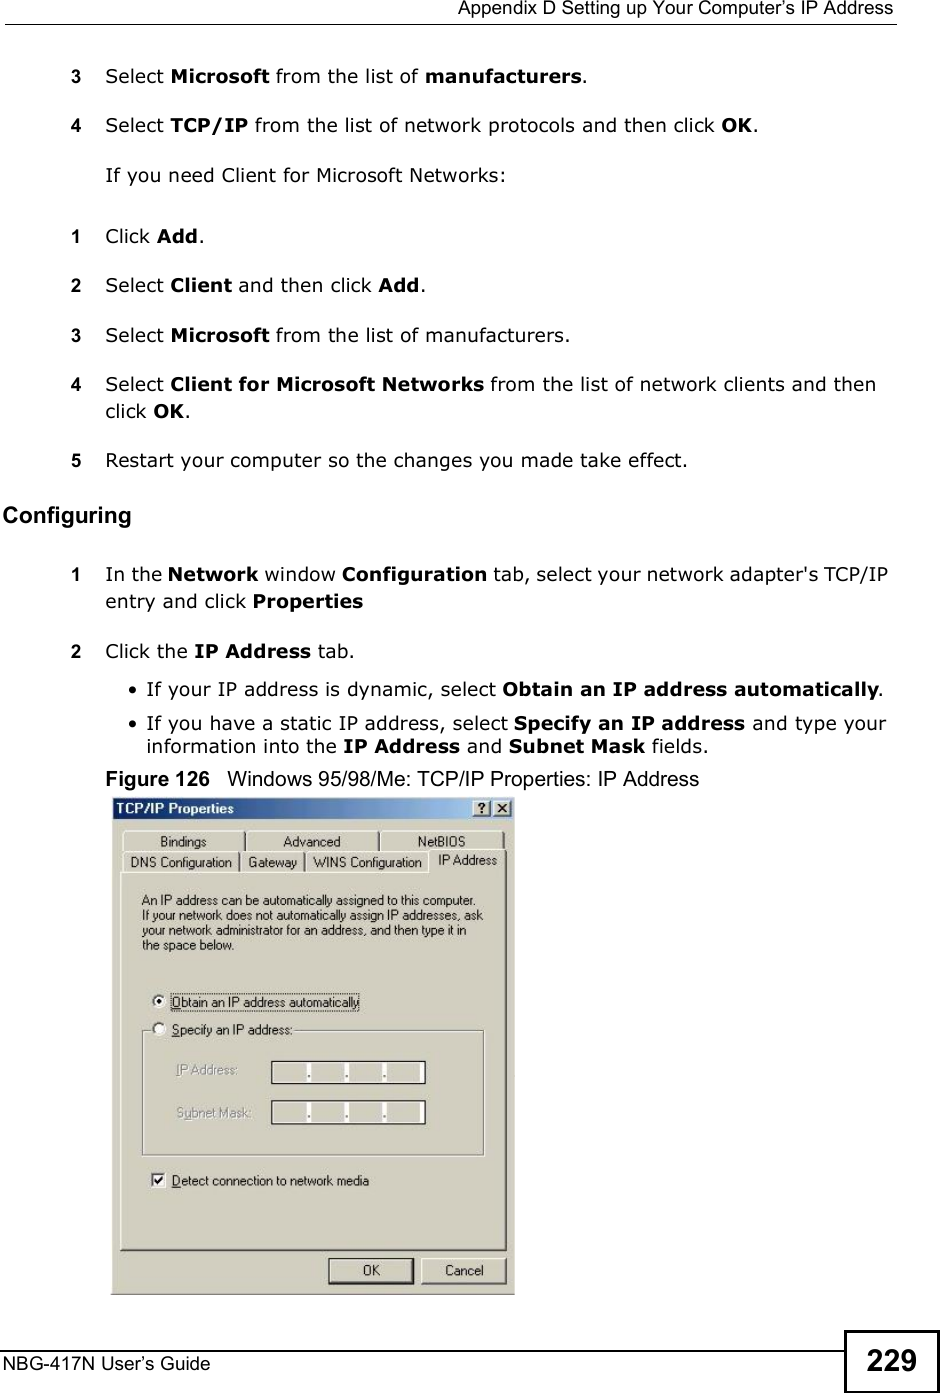  Appendix DSetting up Your Computer s IP AddressNBG-417N User s Guide 2293Select Microsoft from the list of manufacturers.4Select TCP/IP from the list of network protocols and then click OK.If you need Client for Microsoft Networks:1Click Add.2Select Client and then click Add.3Select Microsoft from the list of manufacturers.4Select Client for Microsoft Networks from the list of network clients and then click OK.5Restart your computer so the changes you made take effect.Configuring 1In the Network window Configuration tab, select your network adapter&apos;s TCP/IP entry and click Properties2Click the IP Address tab. If your IP address is dynamic, select Obtain an IP address automatically.  If you have a static IP address, select Specify an IP address and type your information into the IP Address and Subnet Mask fields.Figure 126   Windows 95/98/Me: TCP/IP Properties: IP Address